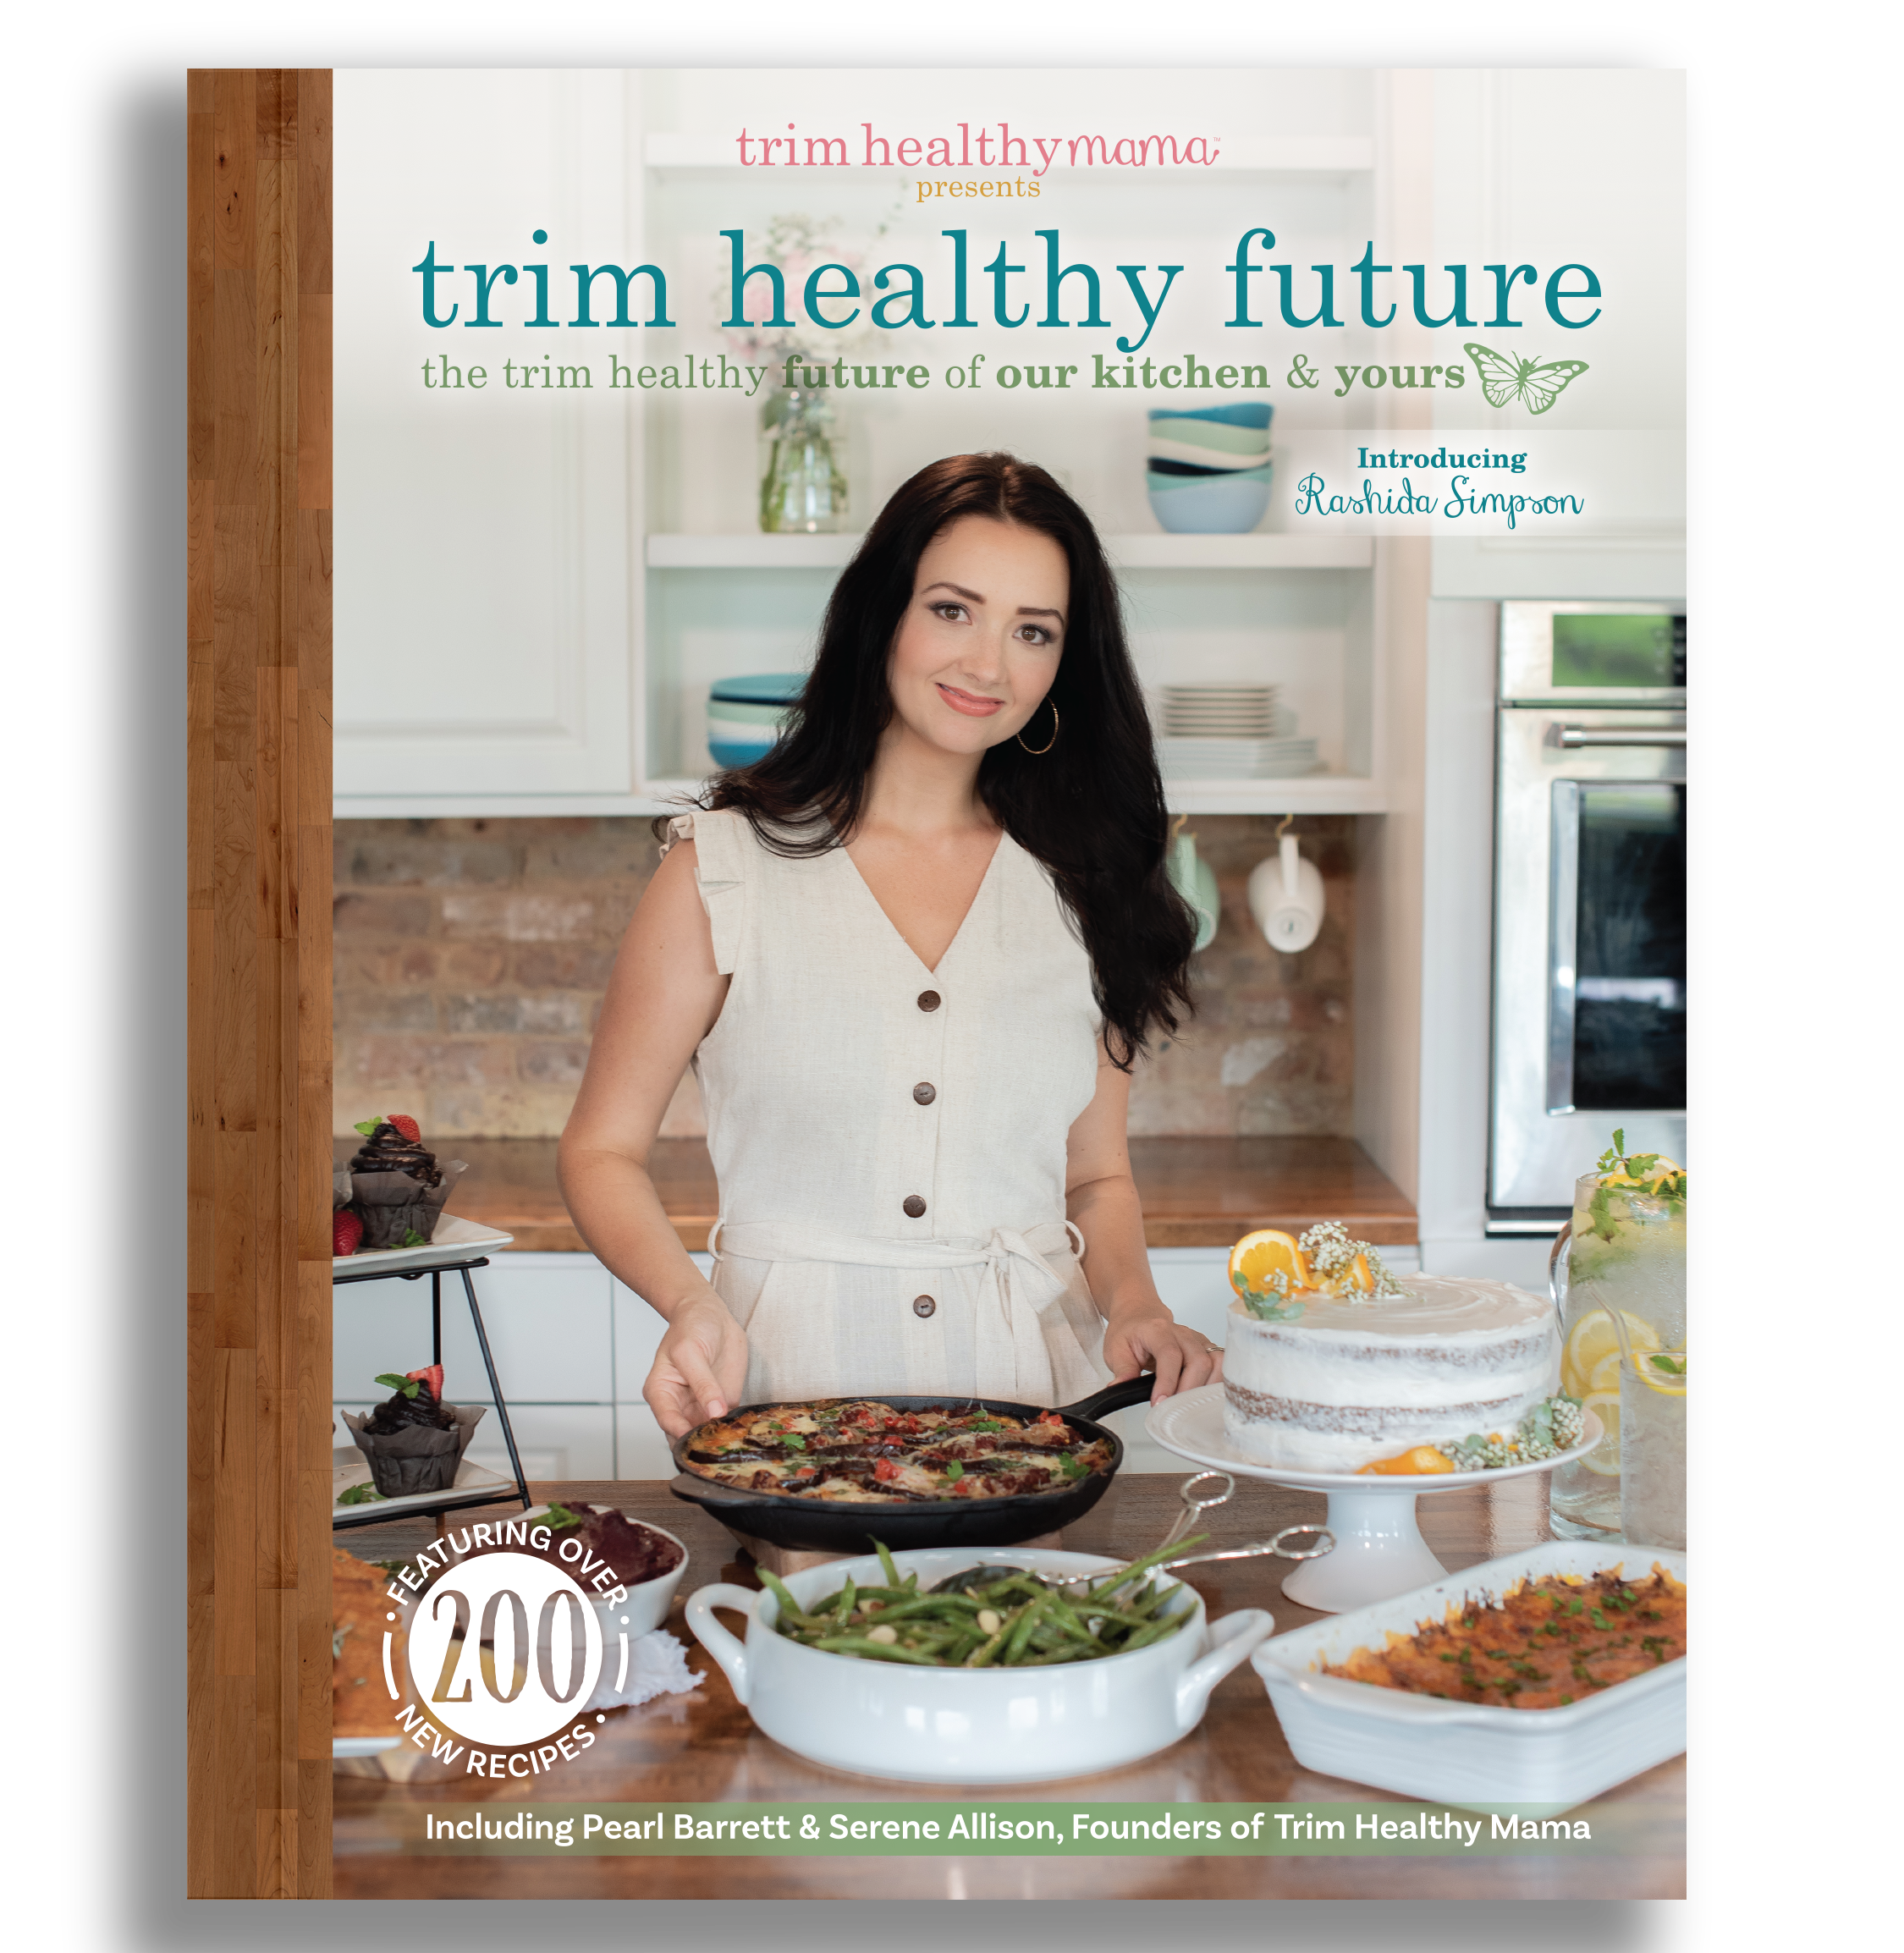 New THM book – Trim Healthy Future available for Pre-Sale Now!